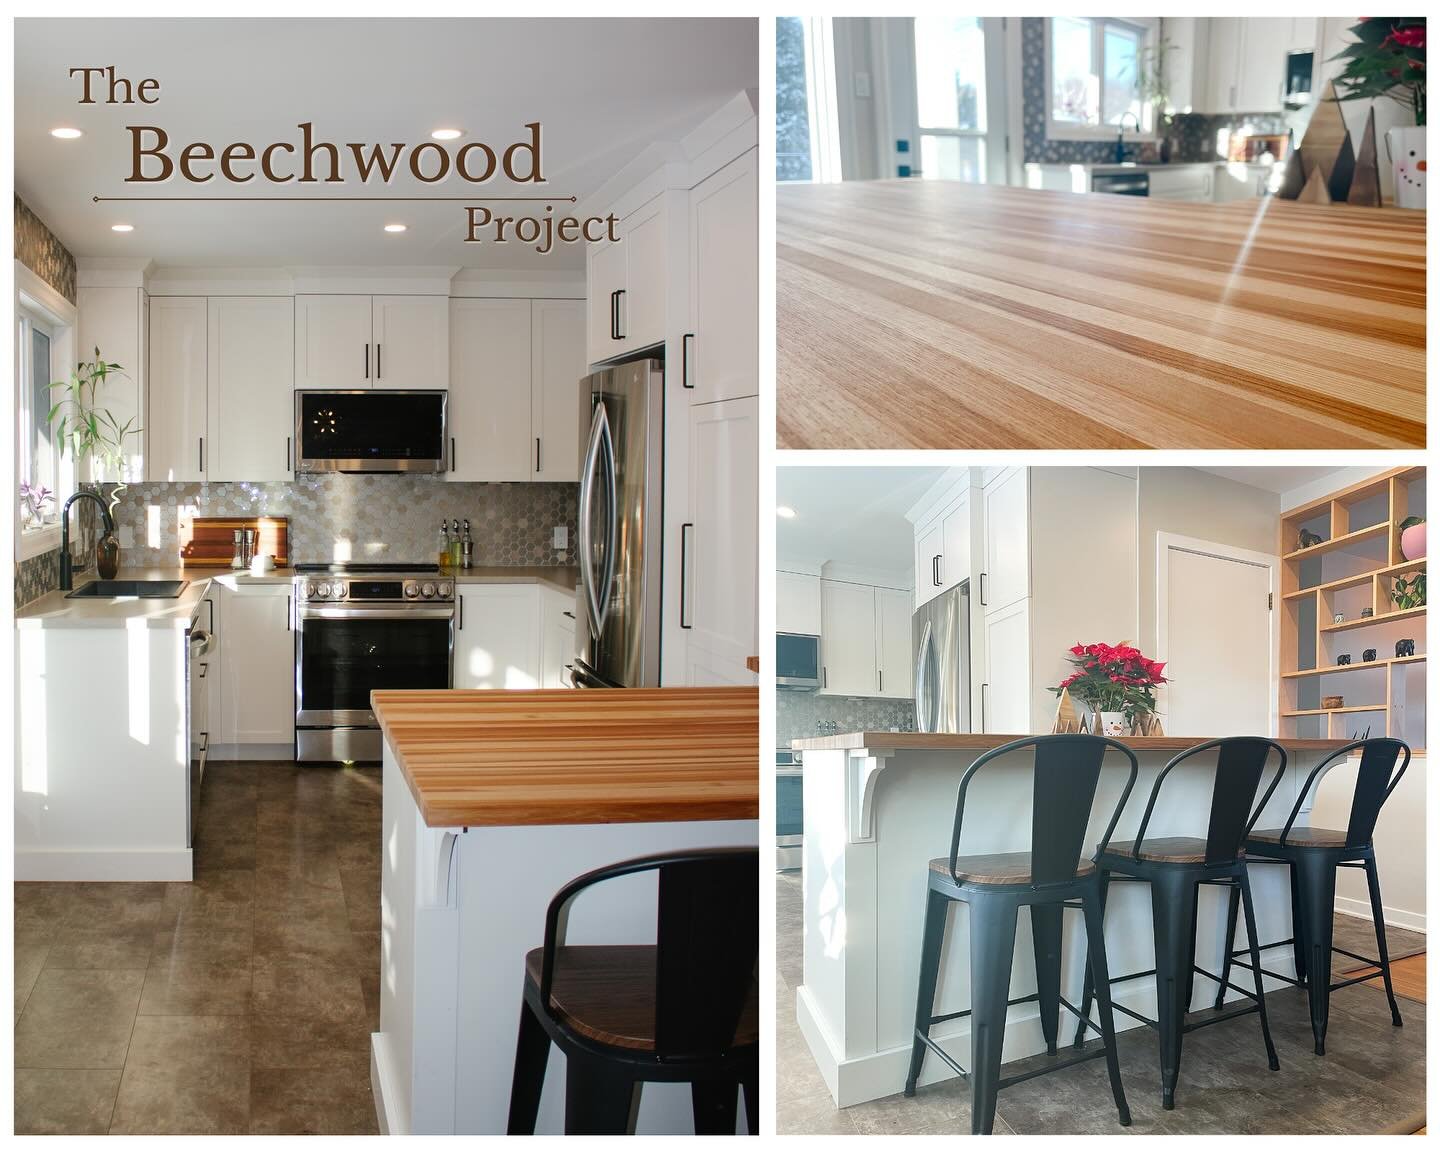 The Beechwood Project☀️Sunny and bright 😍
Full album on our FB page!
#bestclients 
#kitchenrenovation 
#youaremysunshine 
#transformation